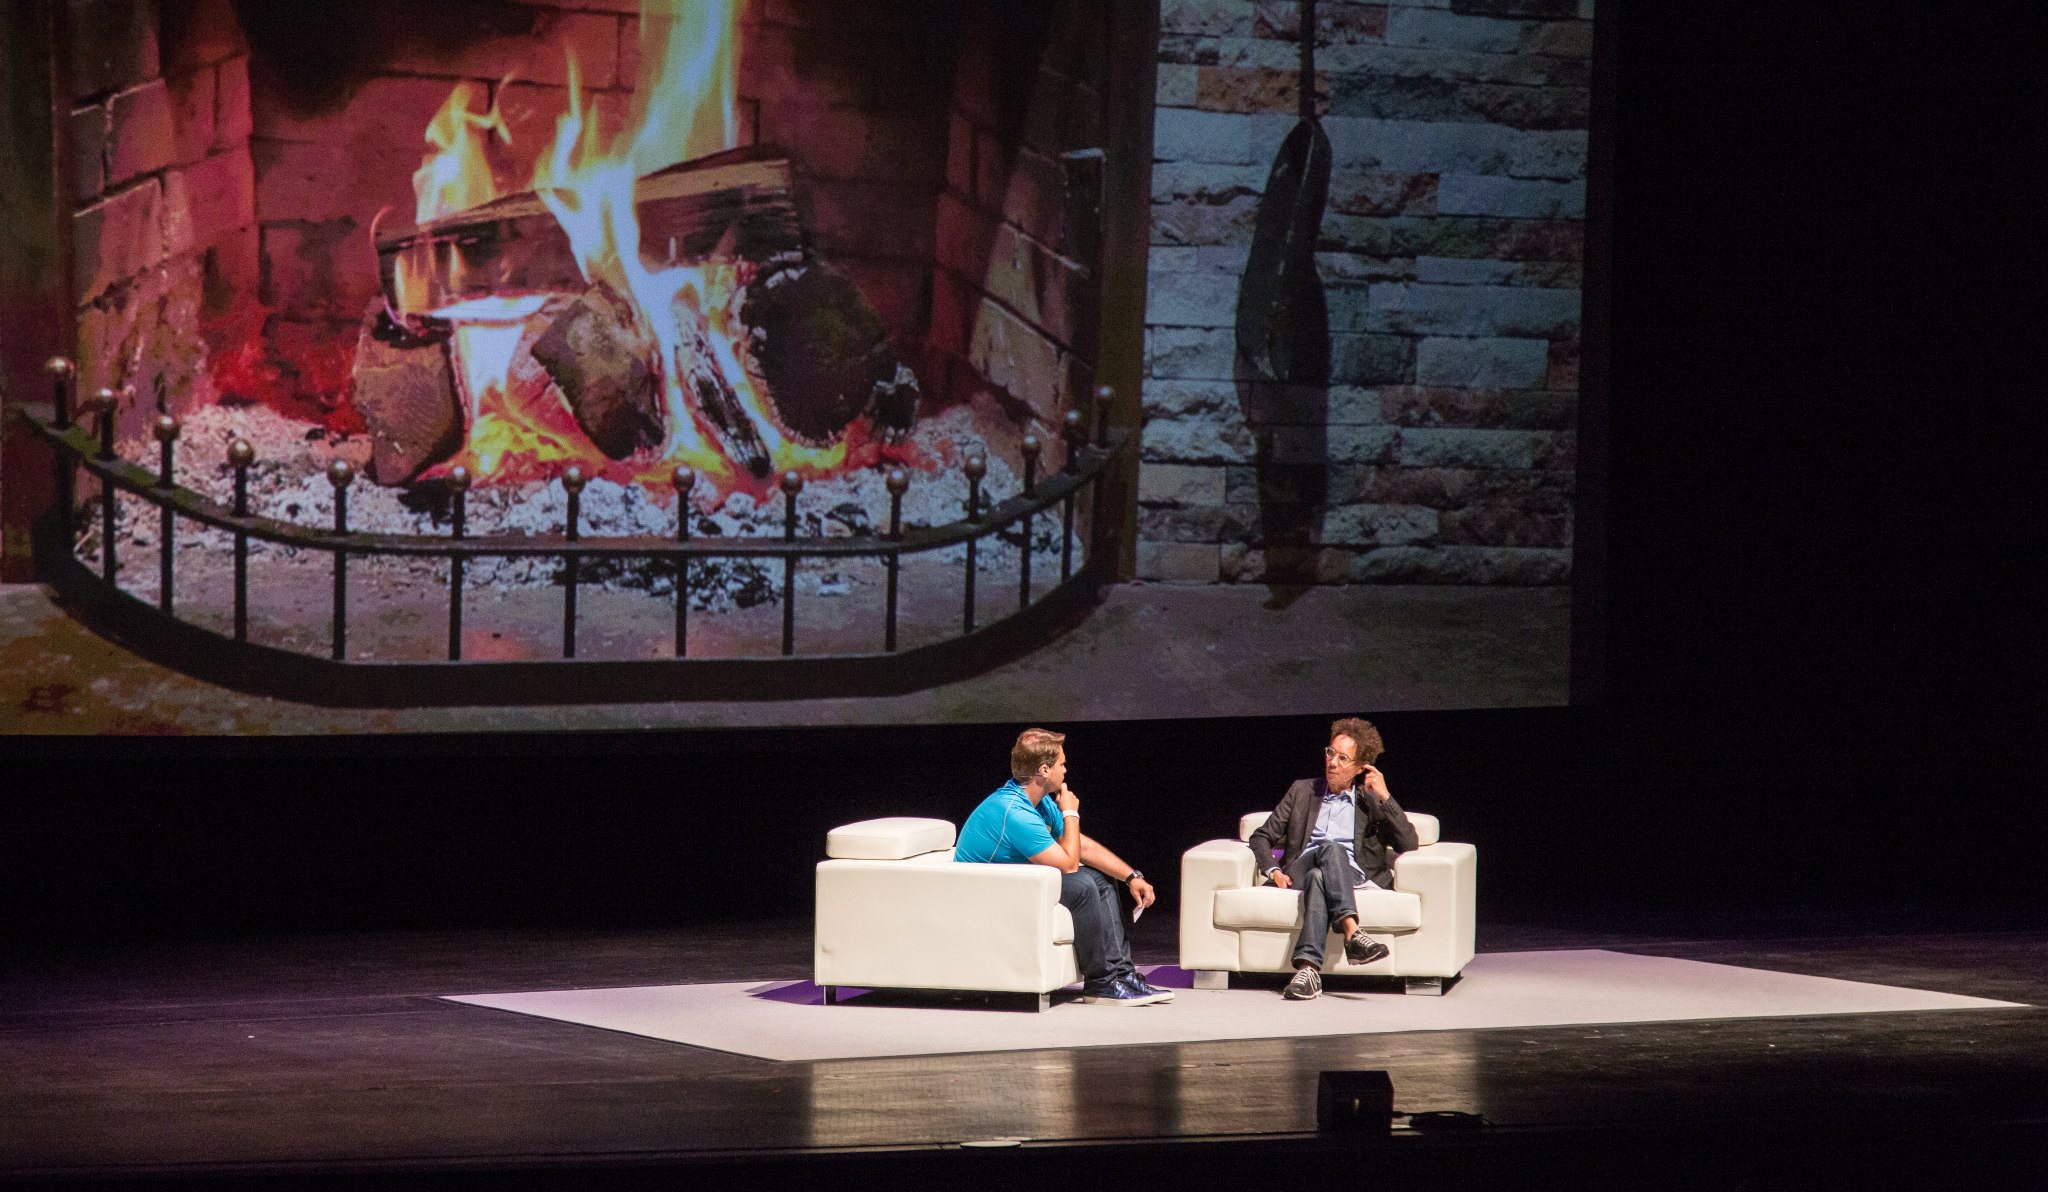 2015 Postback keynote speaker Malcolm Gladwell's chat with Peter Hamilton, TUNE CEO